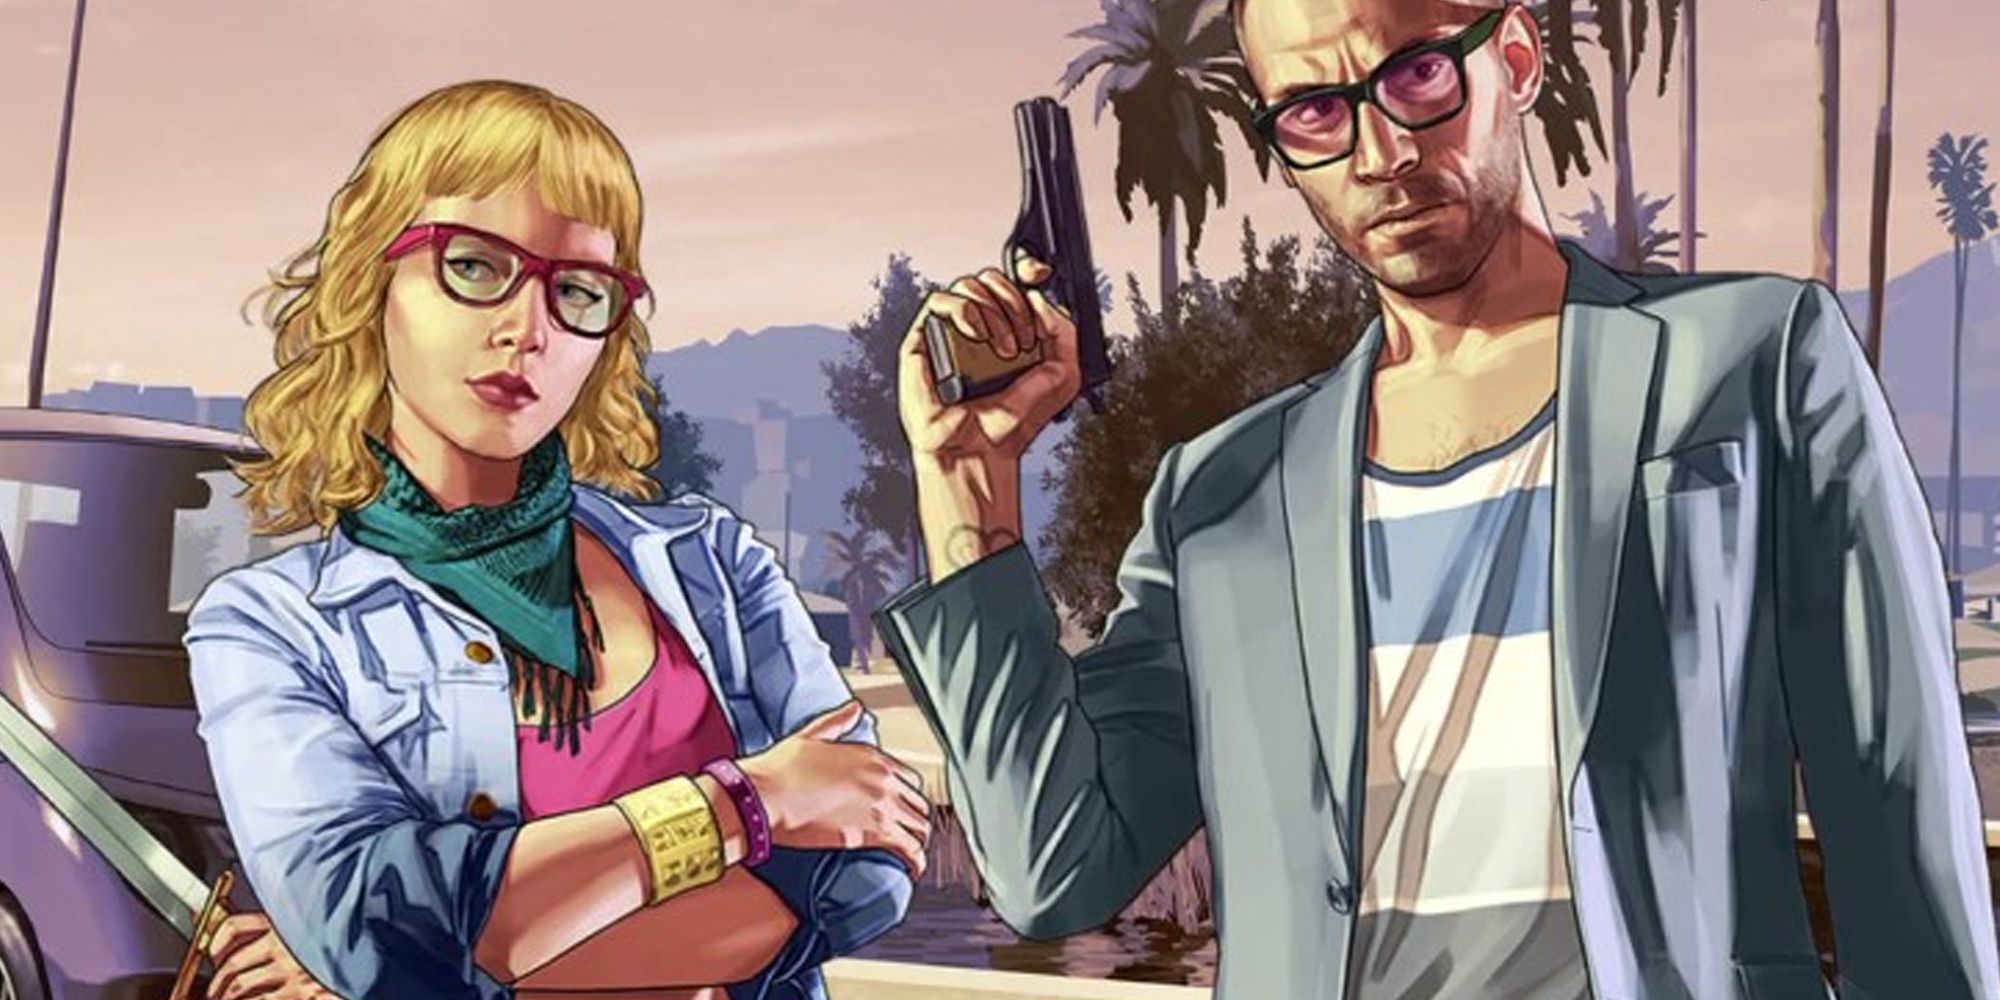 GTA Online loading screen showing a woman with her arms folded and a man holding a pistol